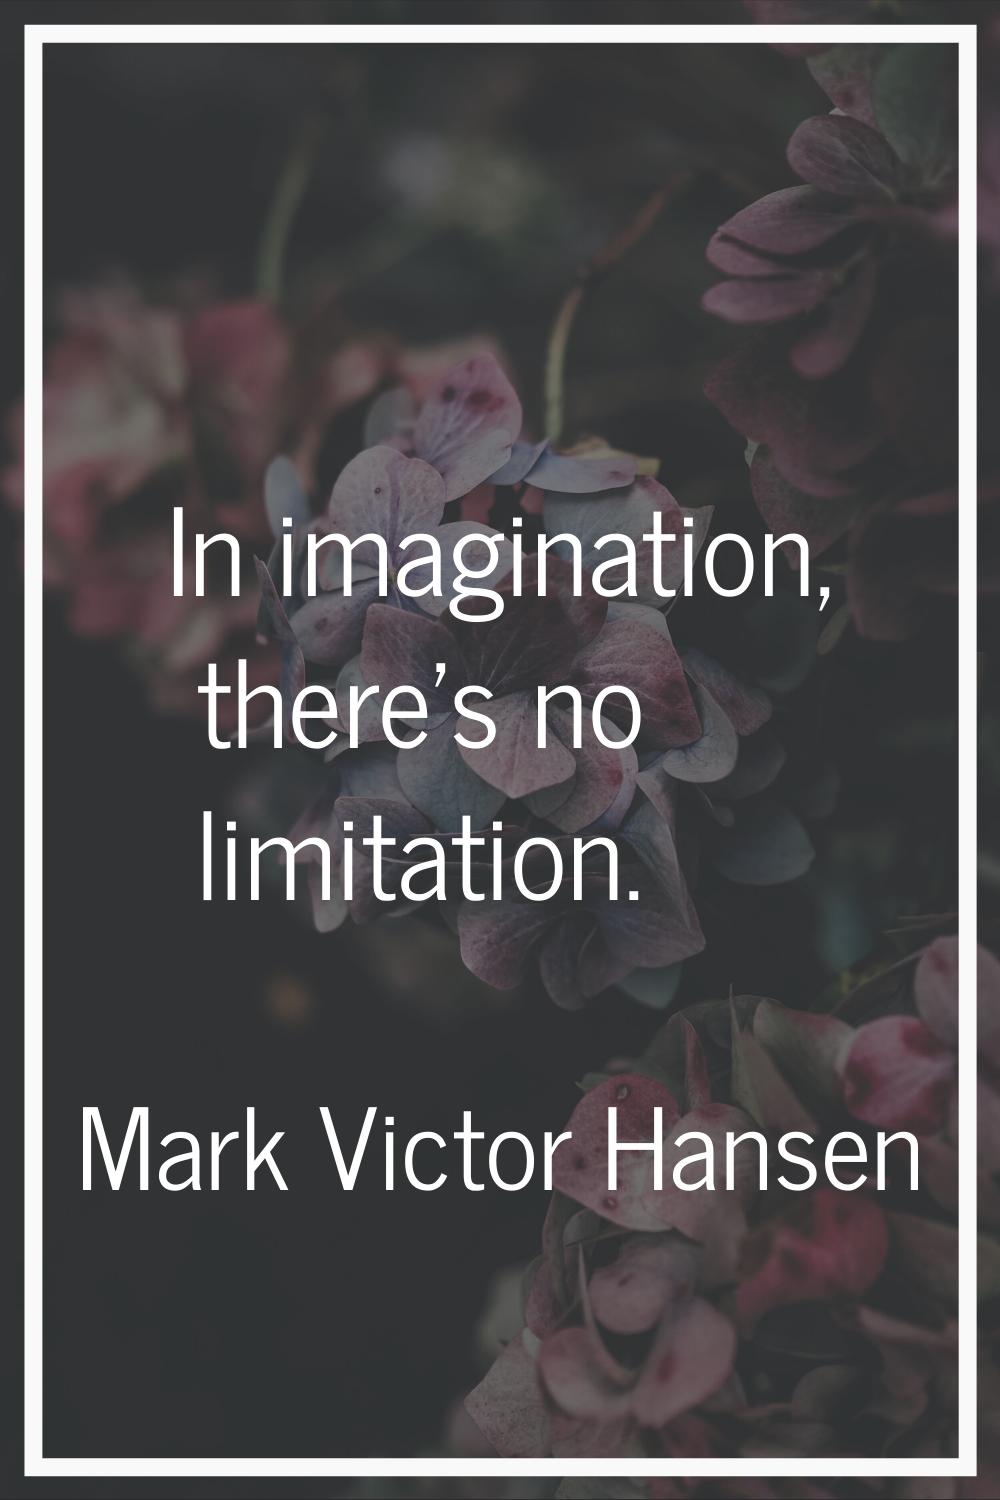 In imagination, there's no limitation.